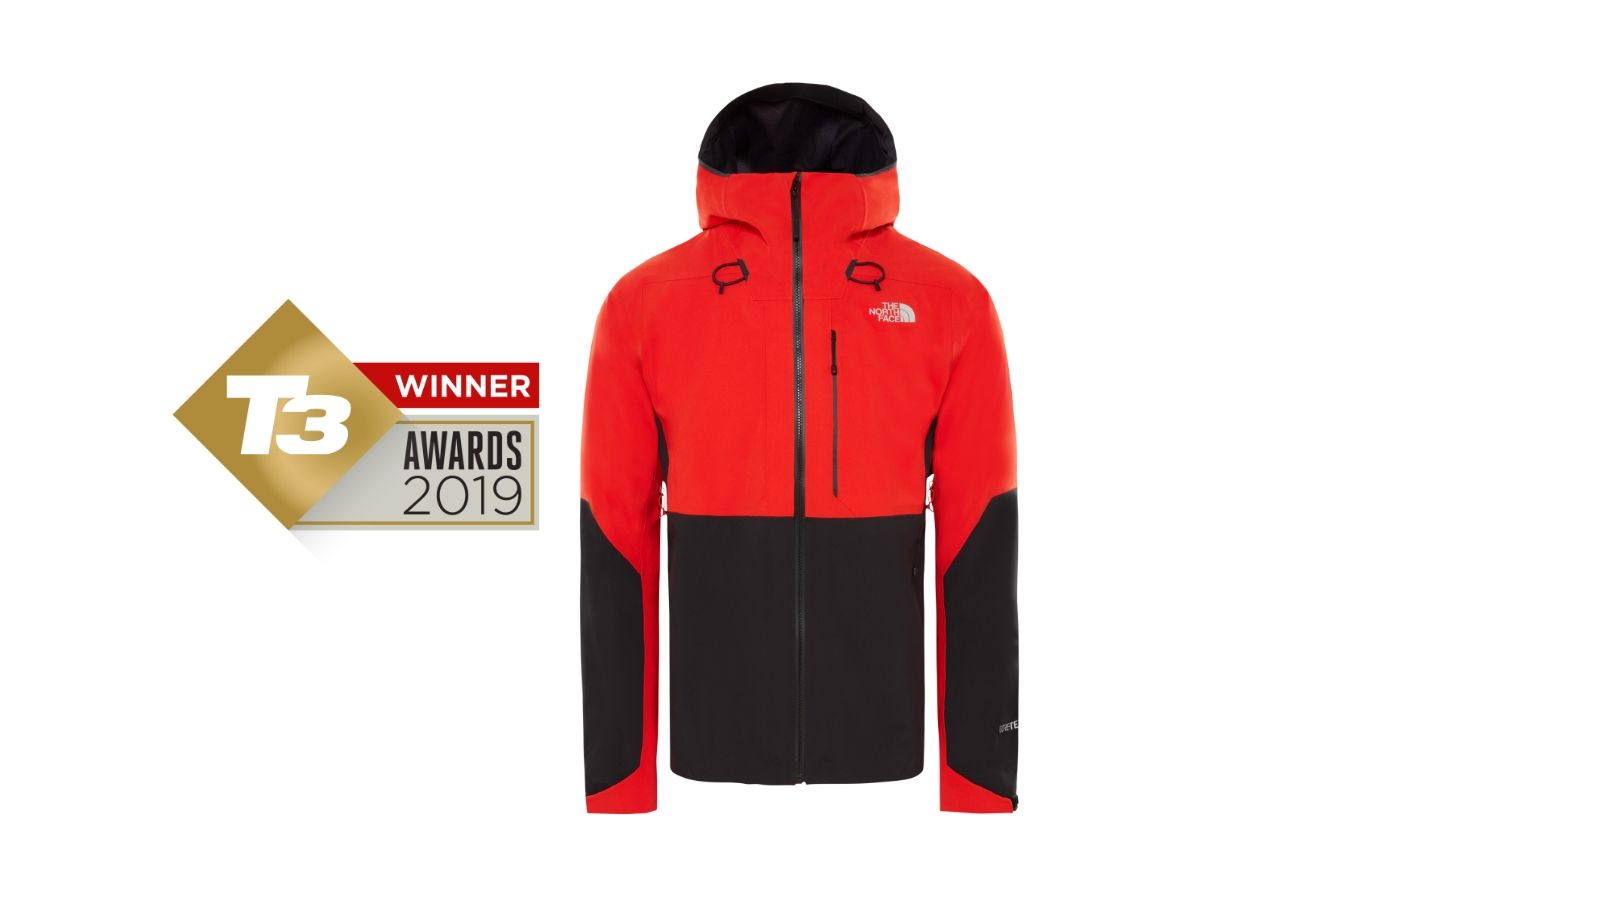 Best waterproof jacket: The North Face Apex Flex GTX 2.0 in black and red